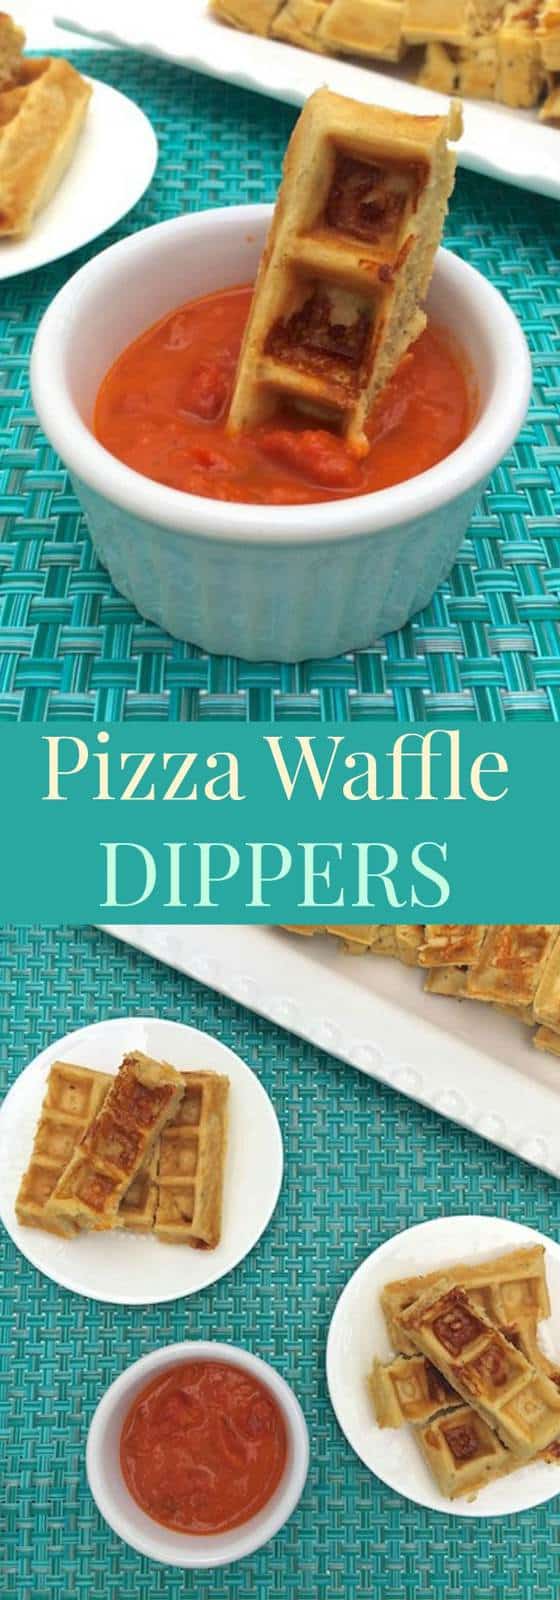 Pizza Waffle Dippers - everyone loves pizza, so why not transform it into a healthy snack recipe! | cupcakesandkalechips.com